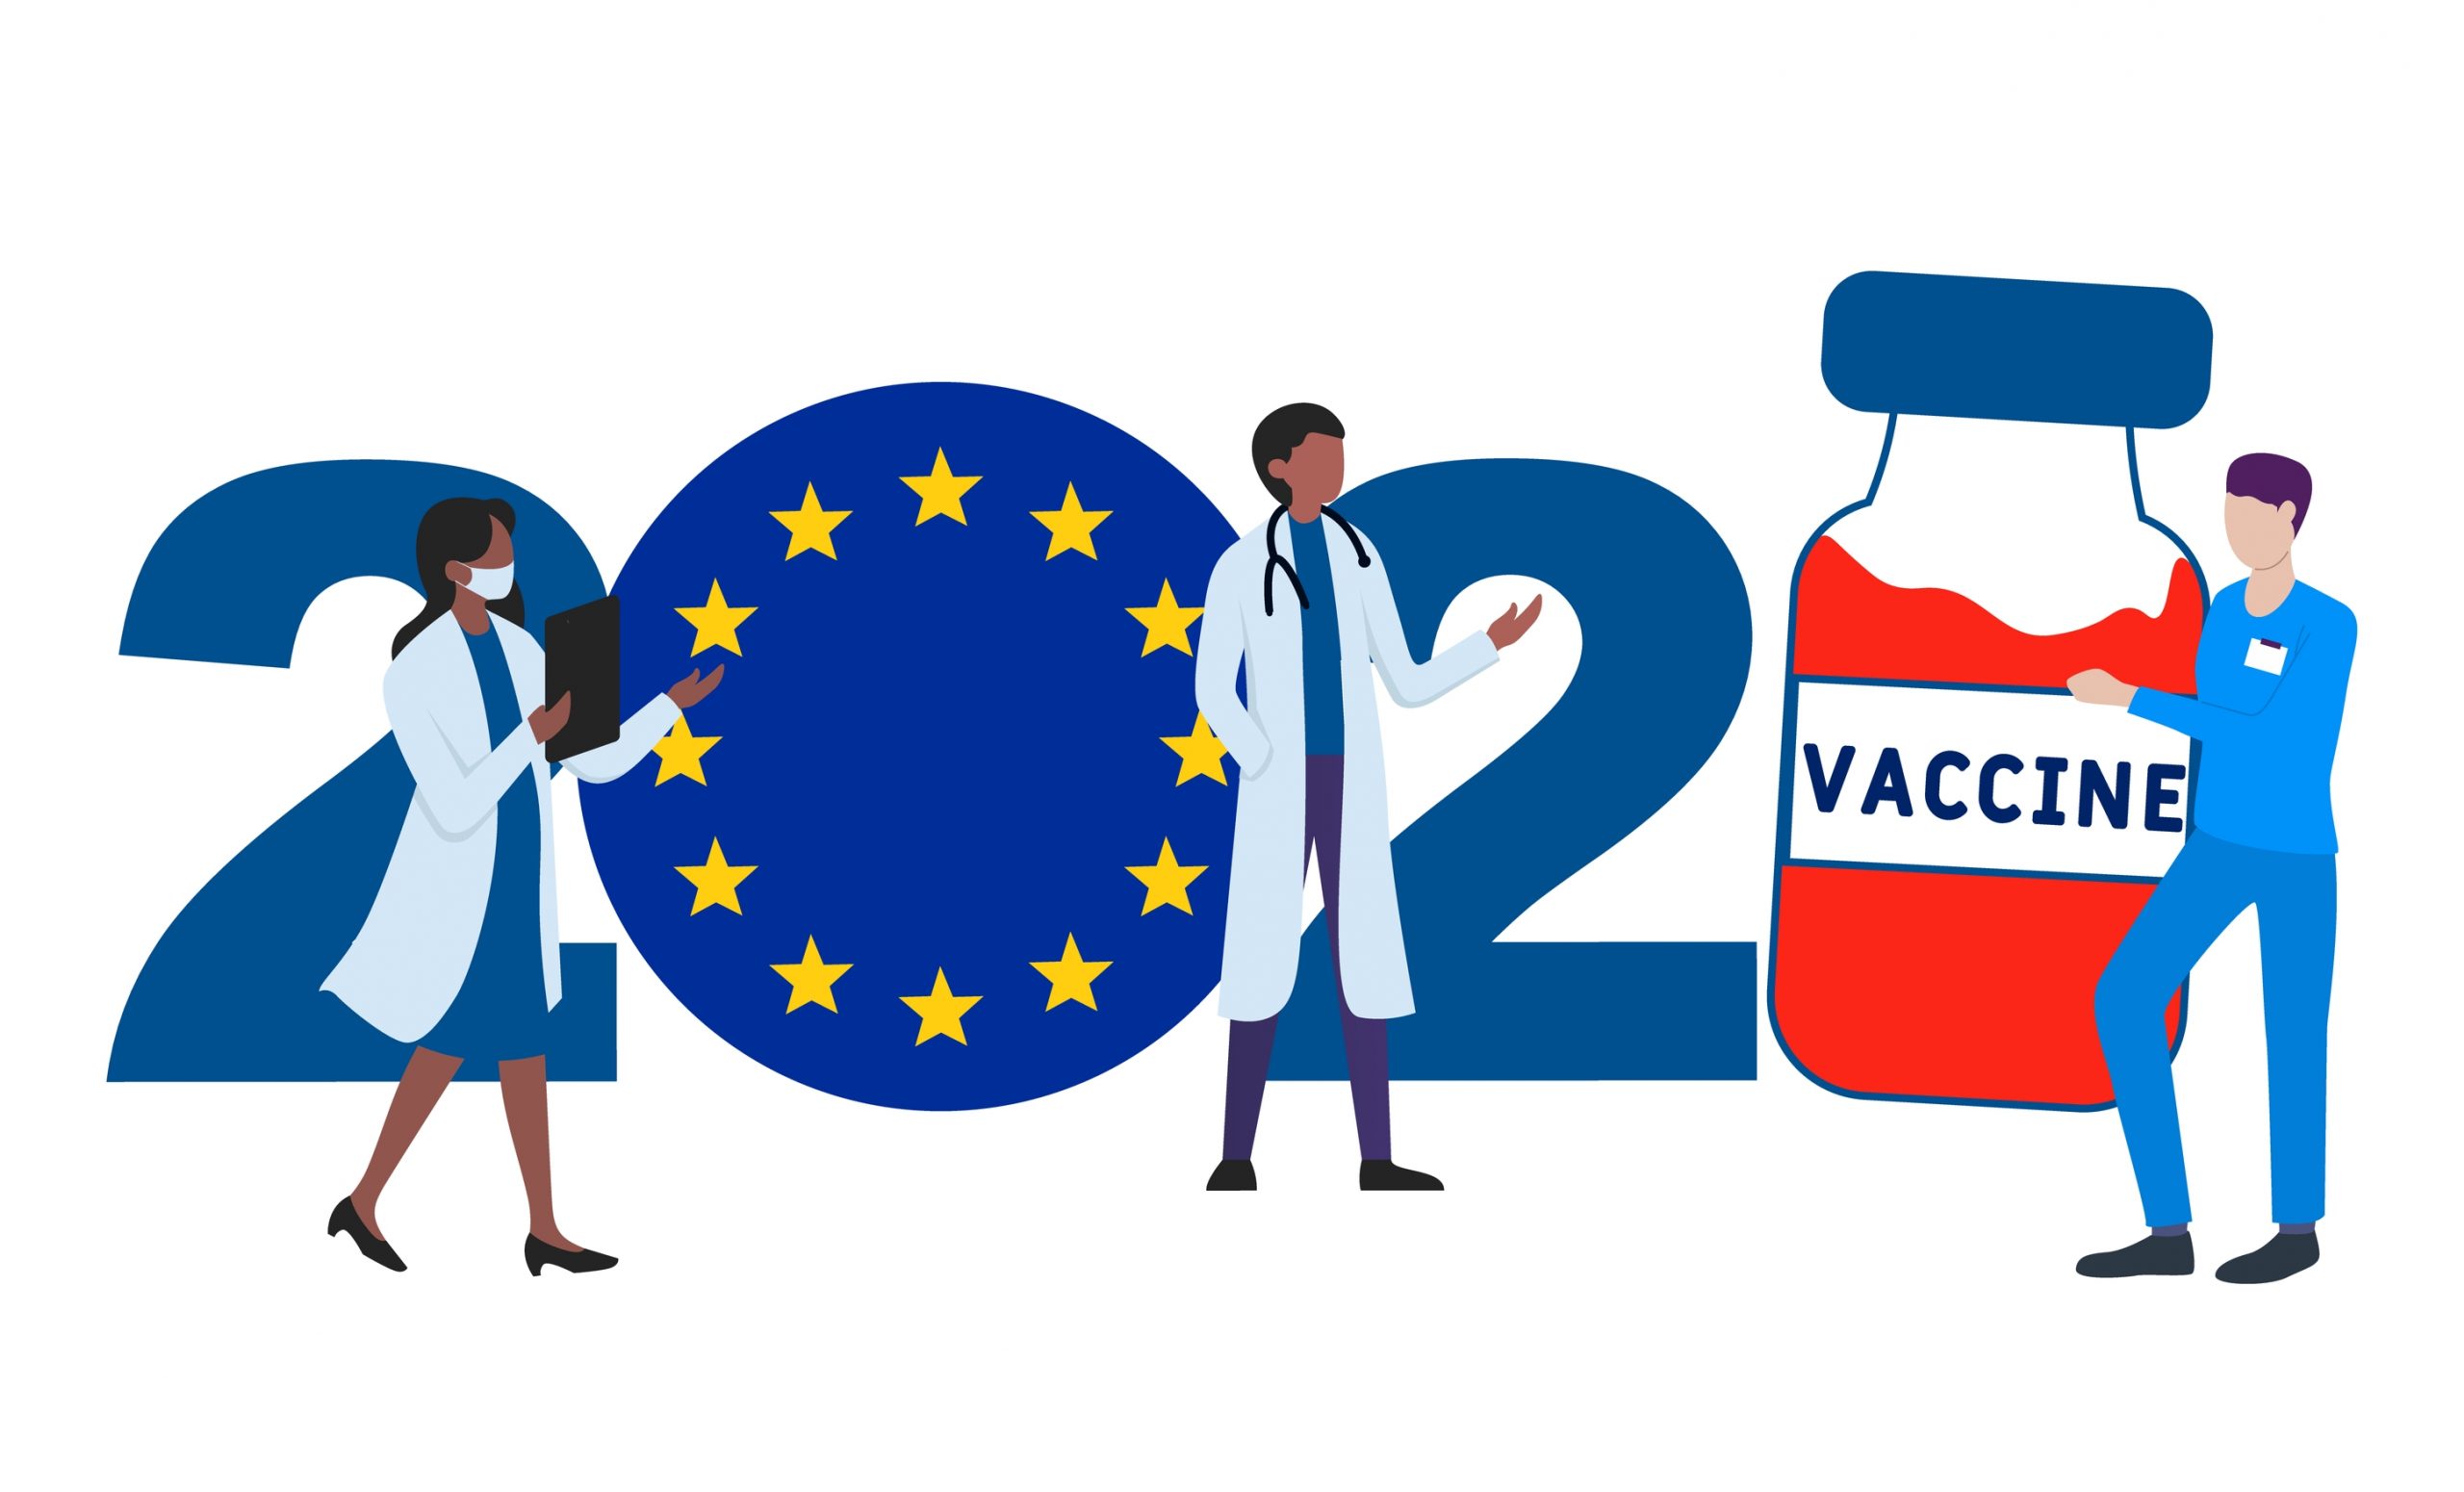 Will COVID-19 vaccination be required for Schengen visa?